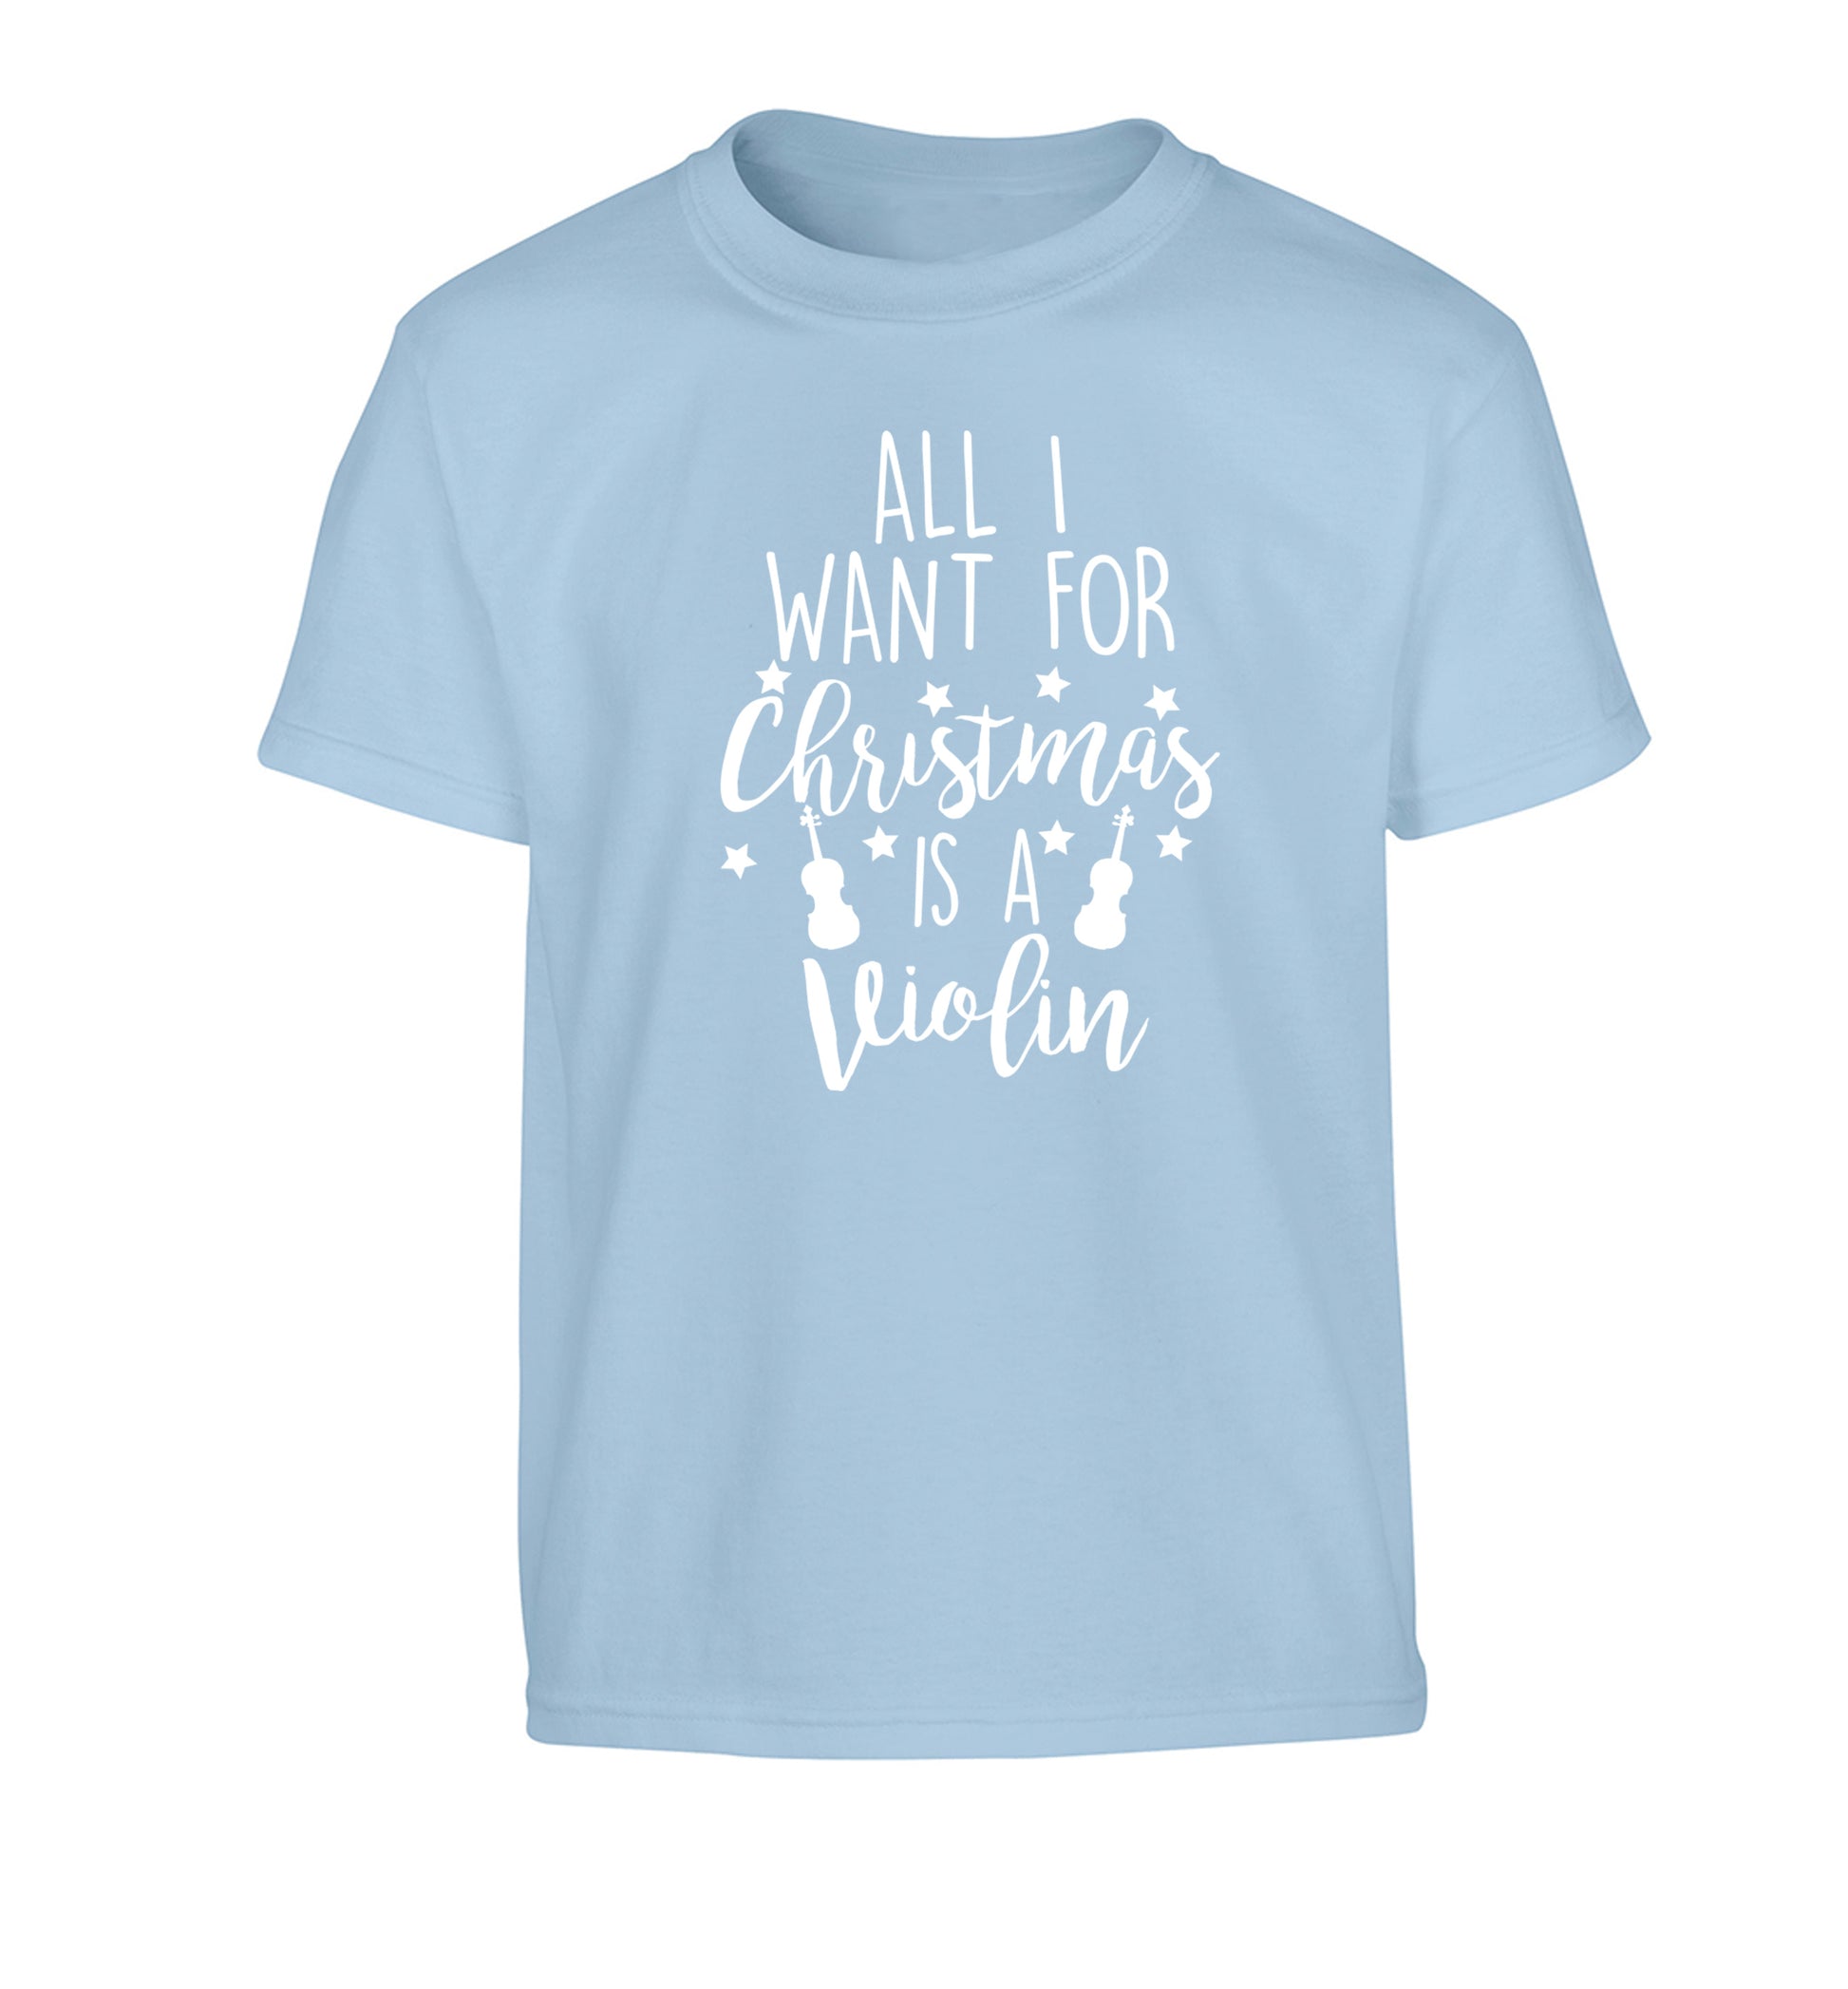 All I Want For Christmas is a Violin Children's light blue Tshirt 12-13 Years